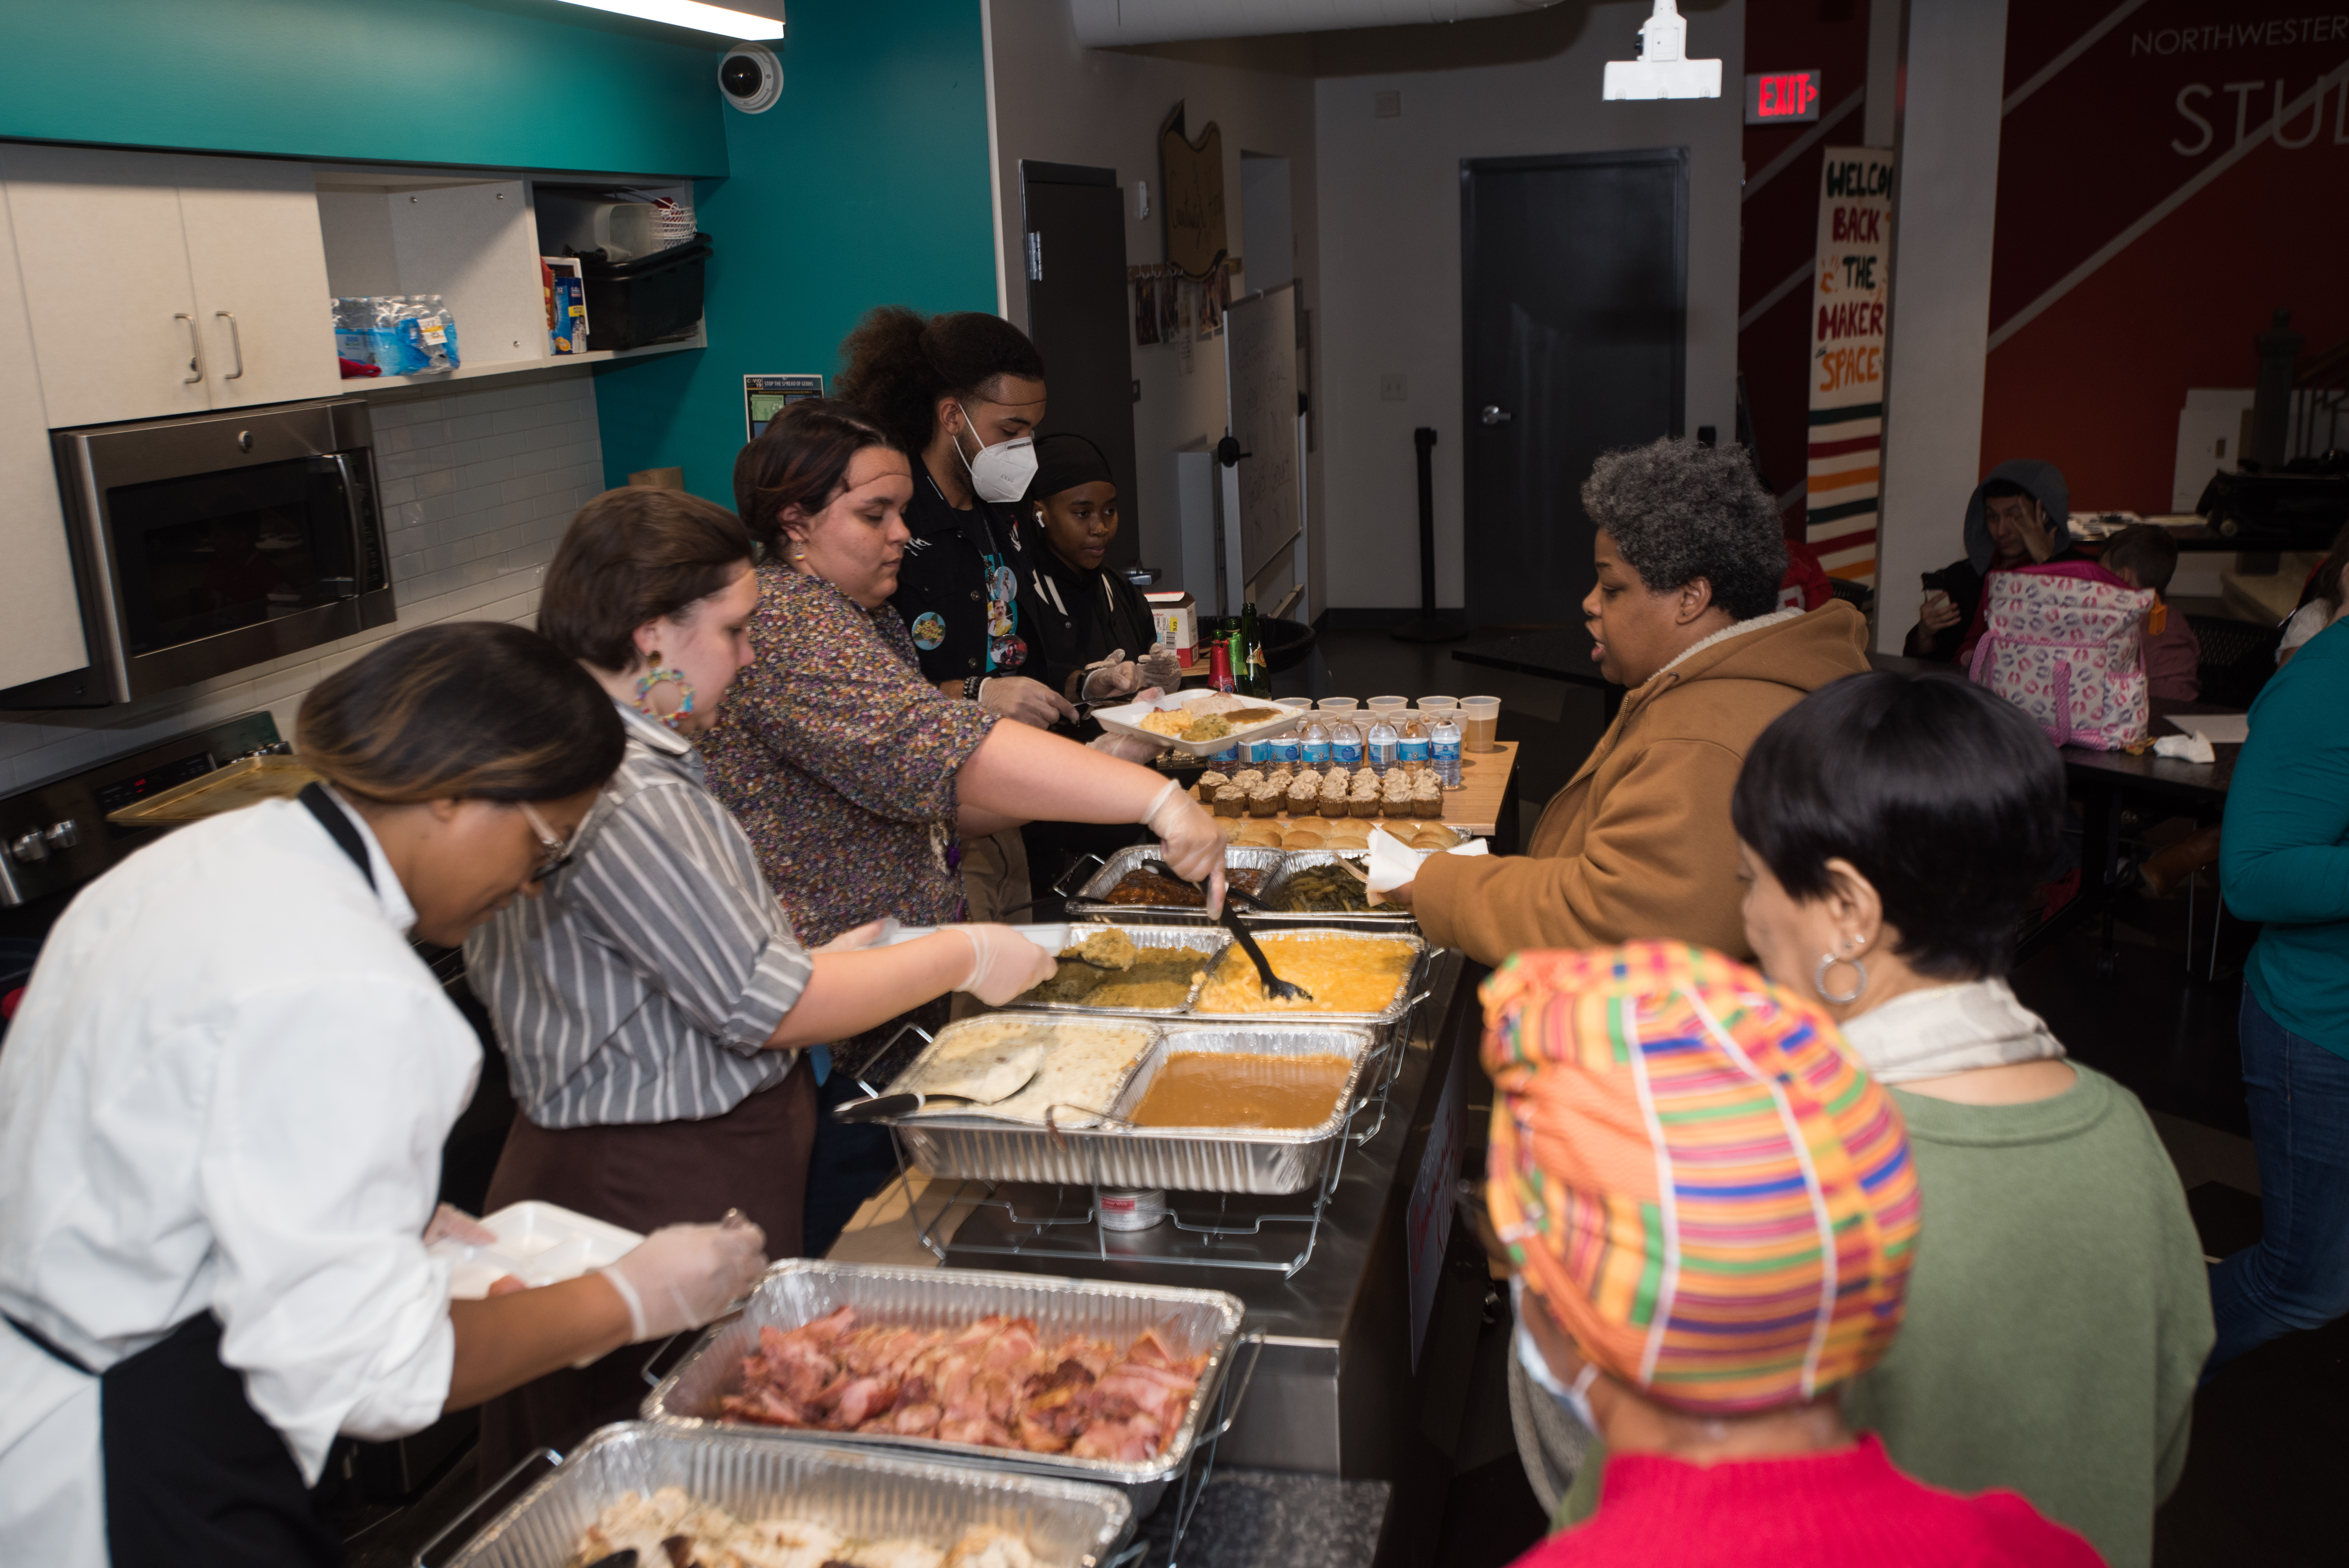 People being served a holiday meal from the kitchen